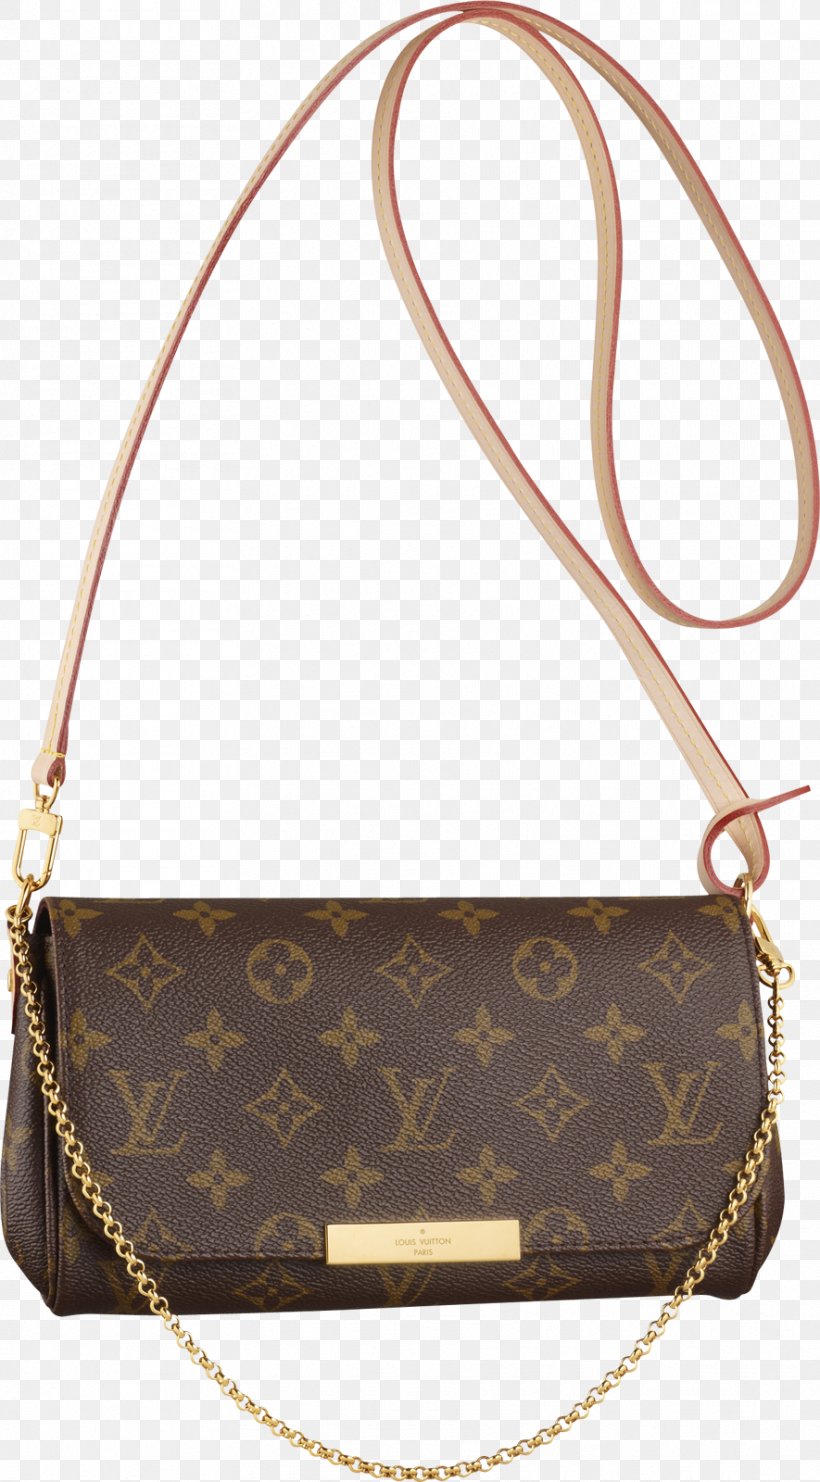 Louis Vuitton Brown Man Wallet Isolated on White Background Editorial Image  - Image of luxury, isolation: 104852560